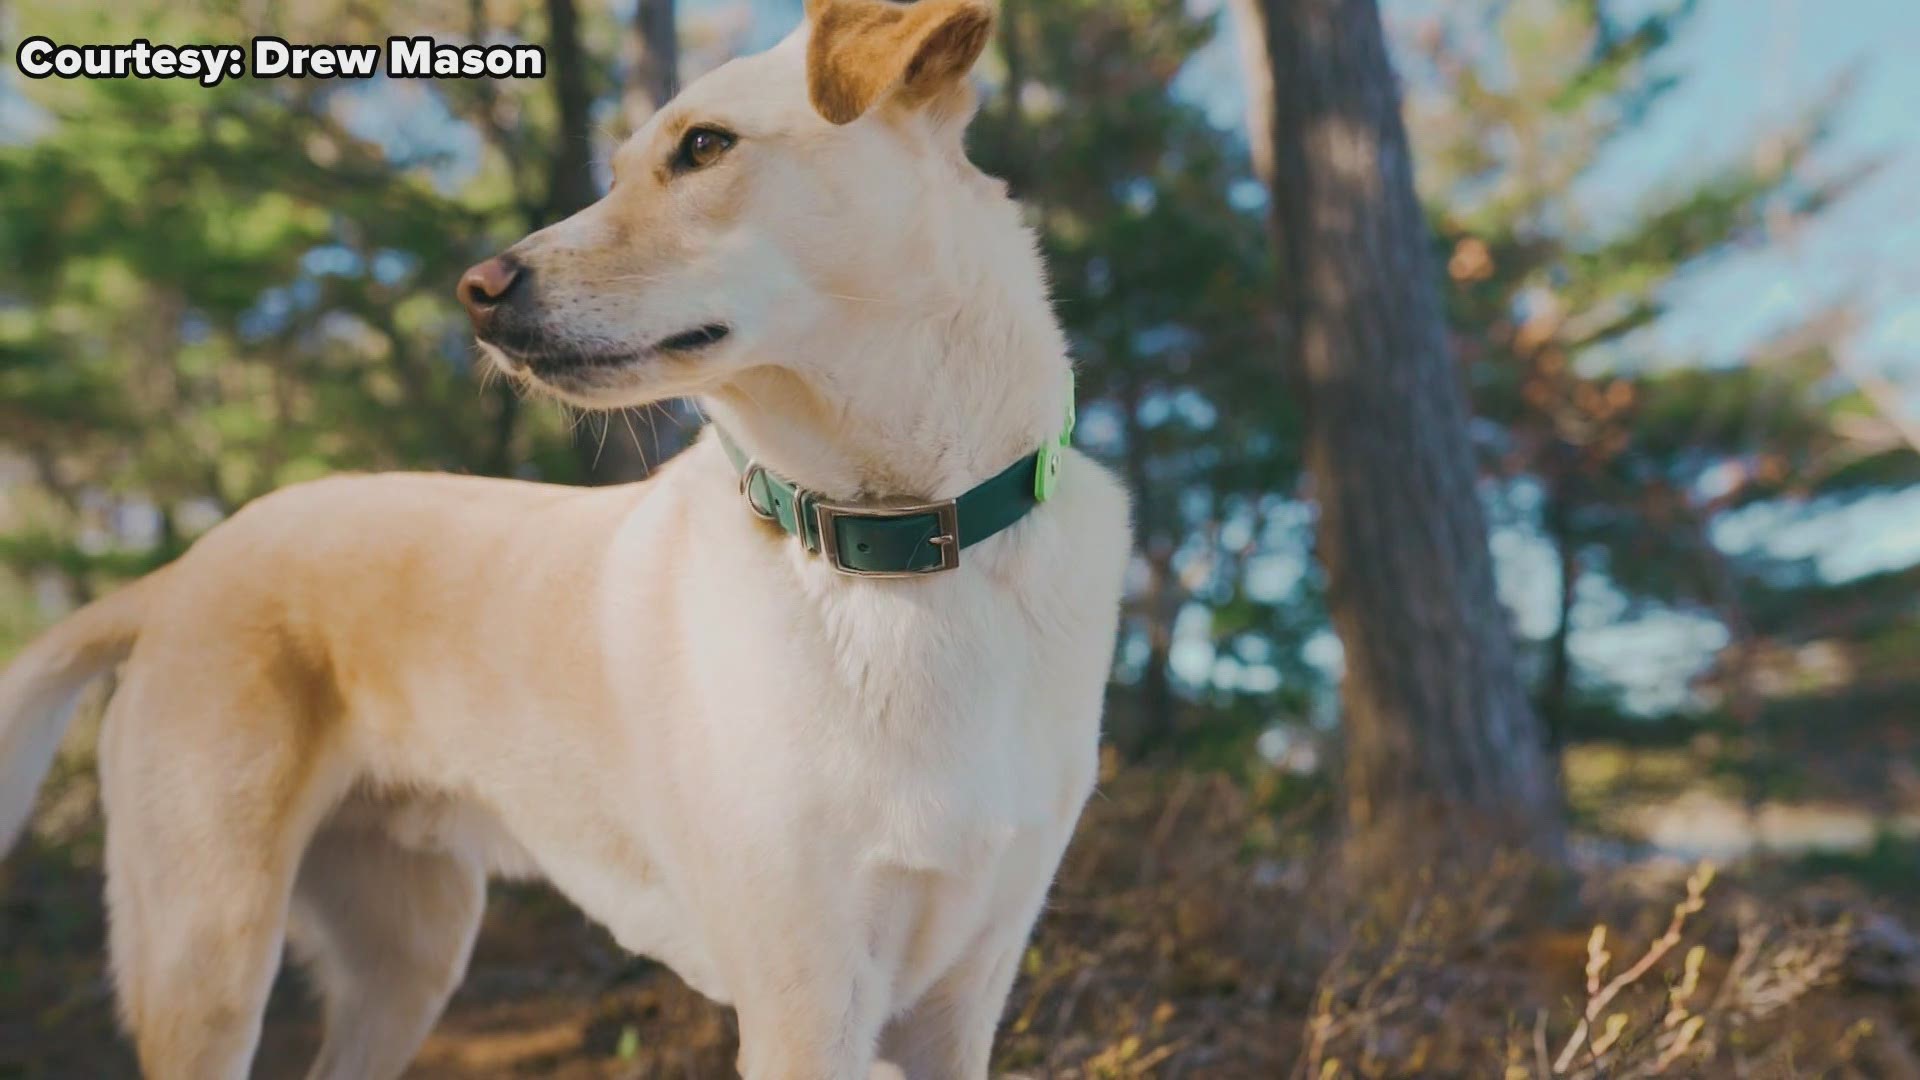 Drew Mason and his rescue dog highlight pet-friendly vacation spots in Michigan.